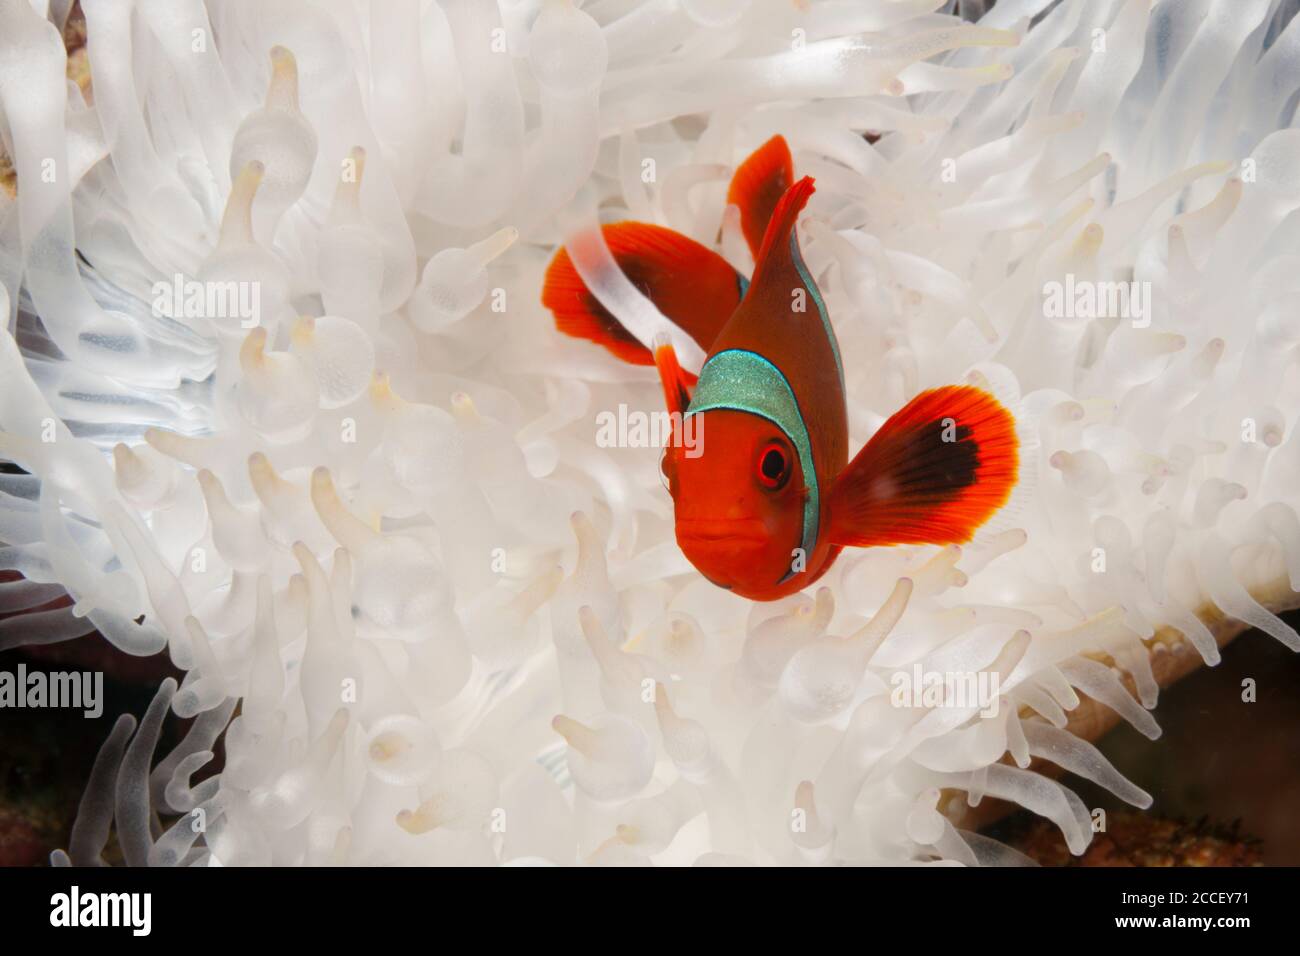 Pink anemonefish in Sea anemone, Amphiprion perideraion, Kimbe Bay, New Britain, Papua New Guinea Stock Photo